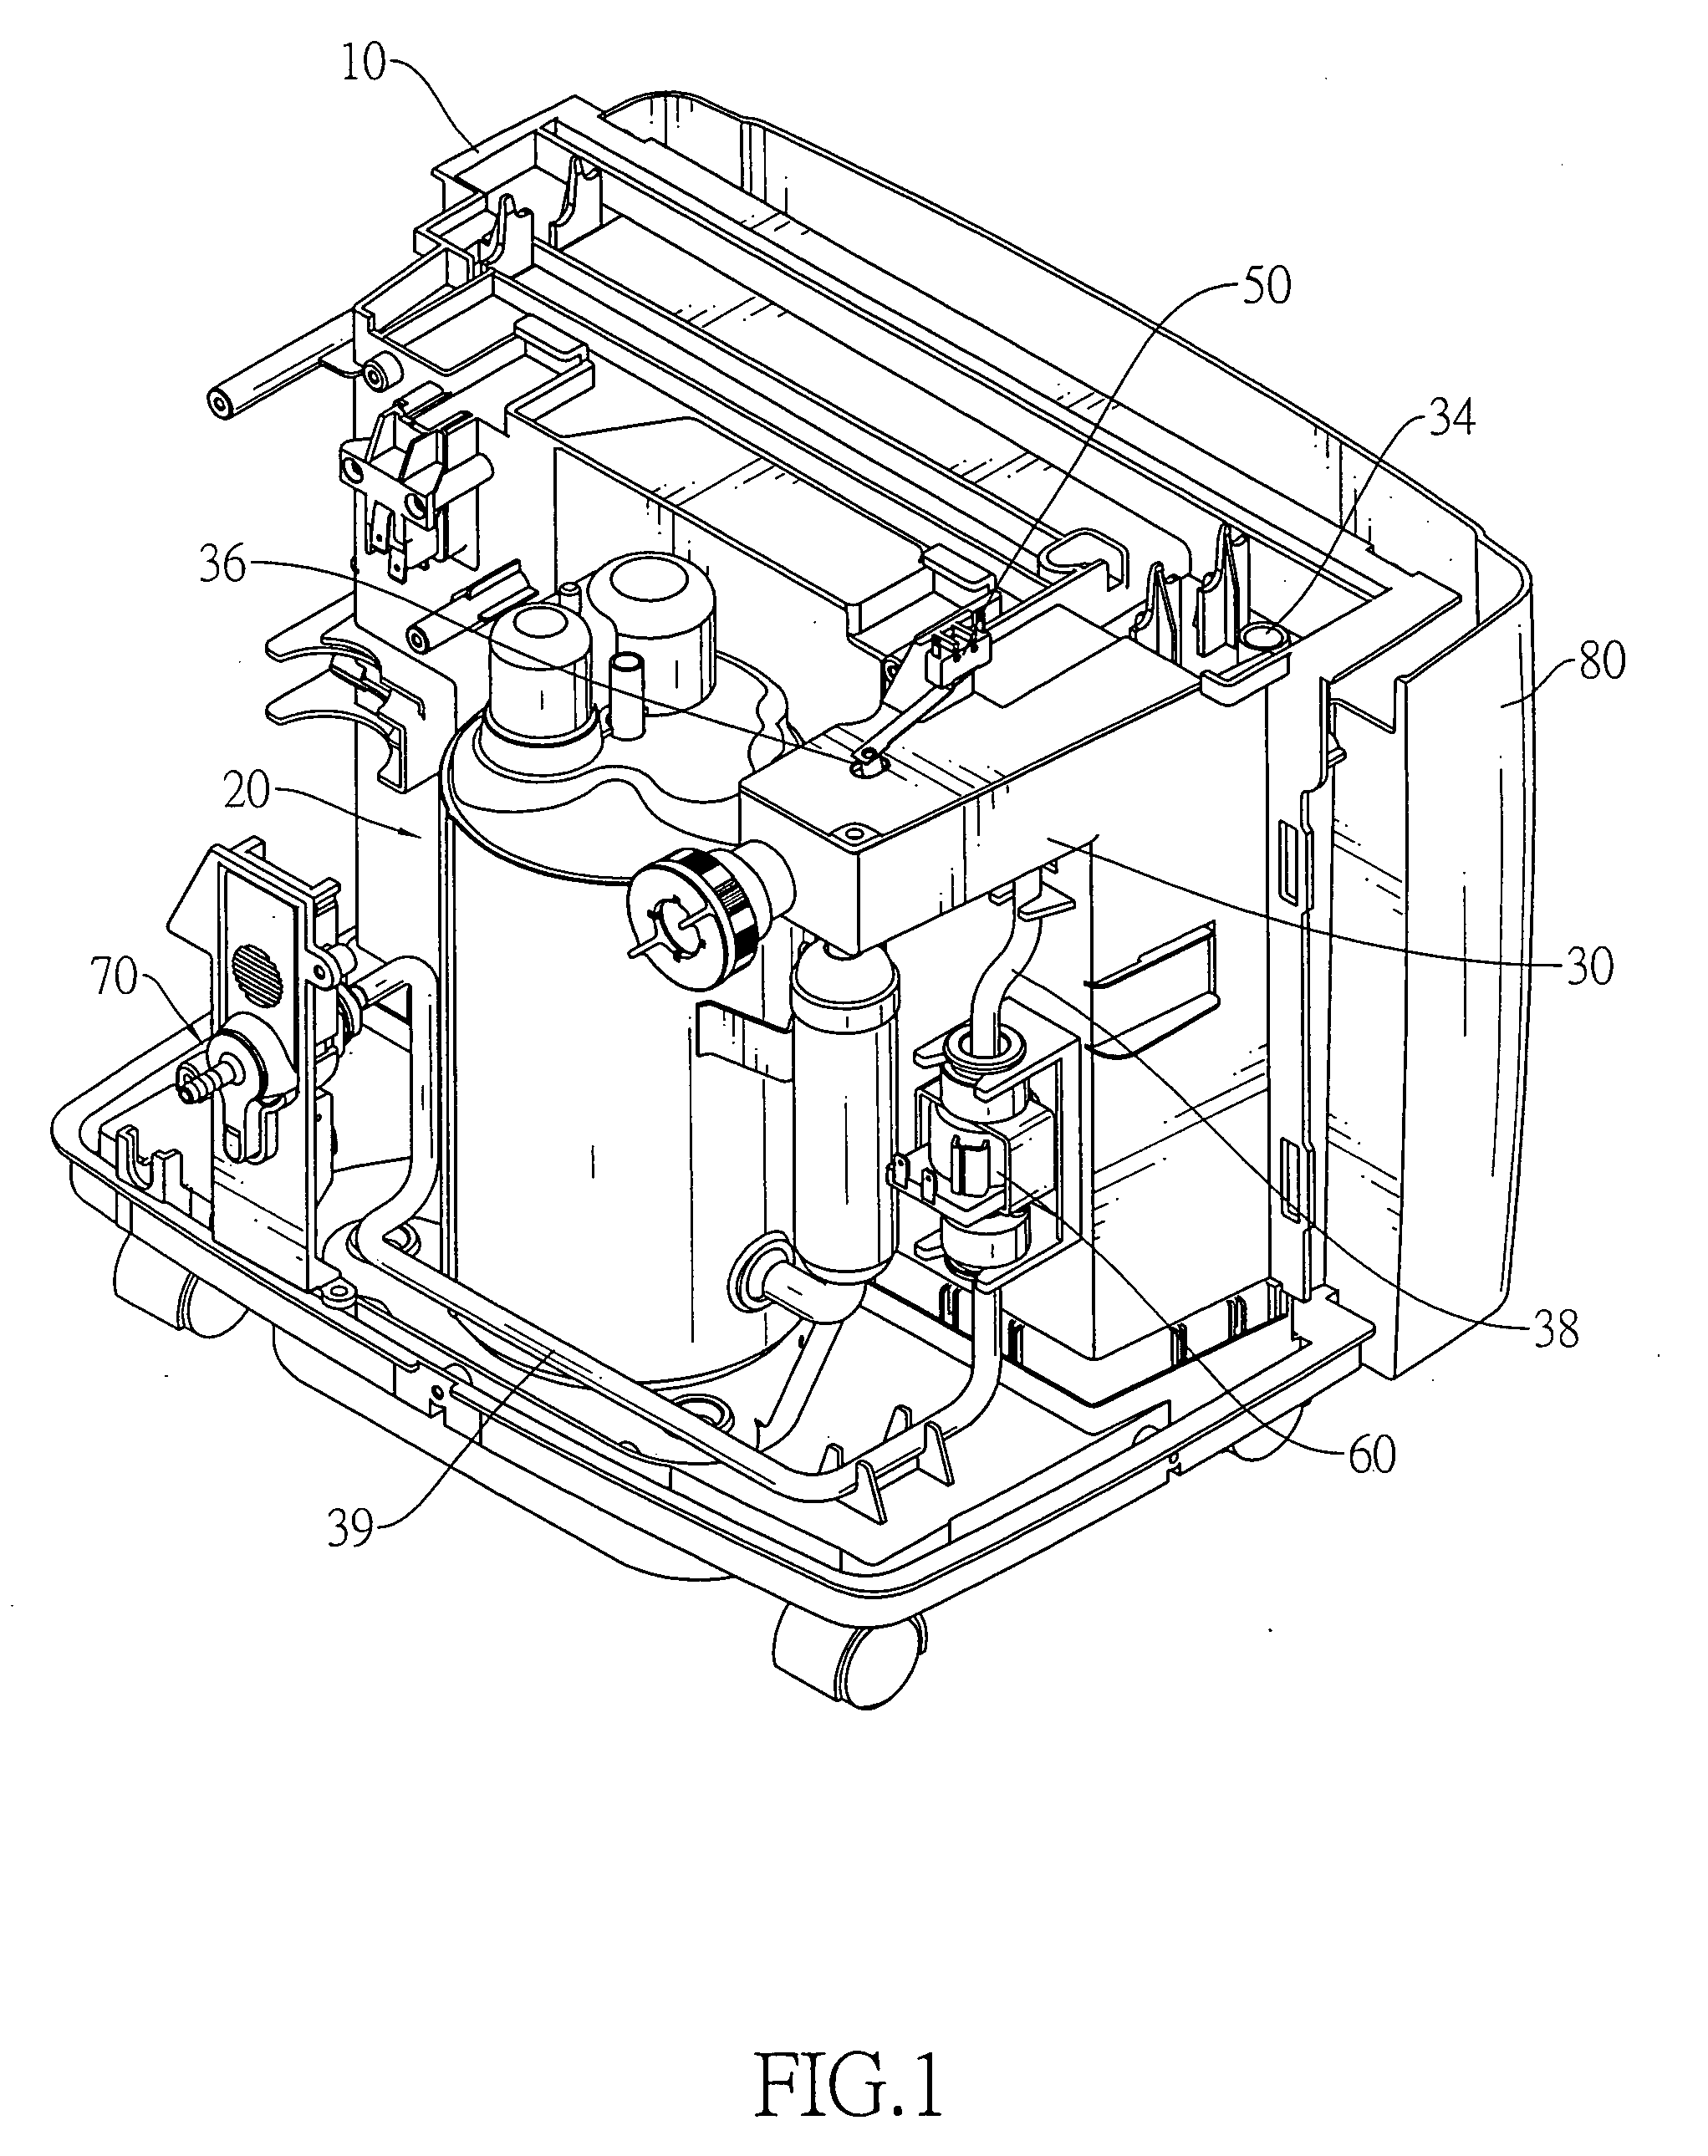 Dehumidifier with multistage draining